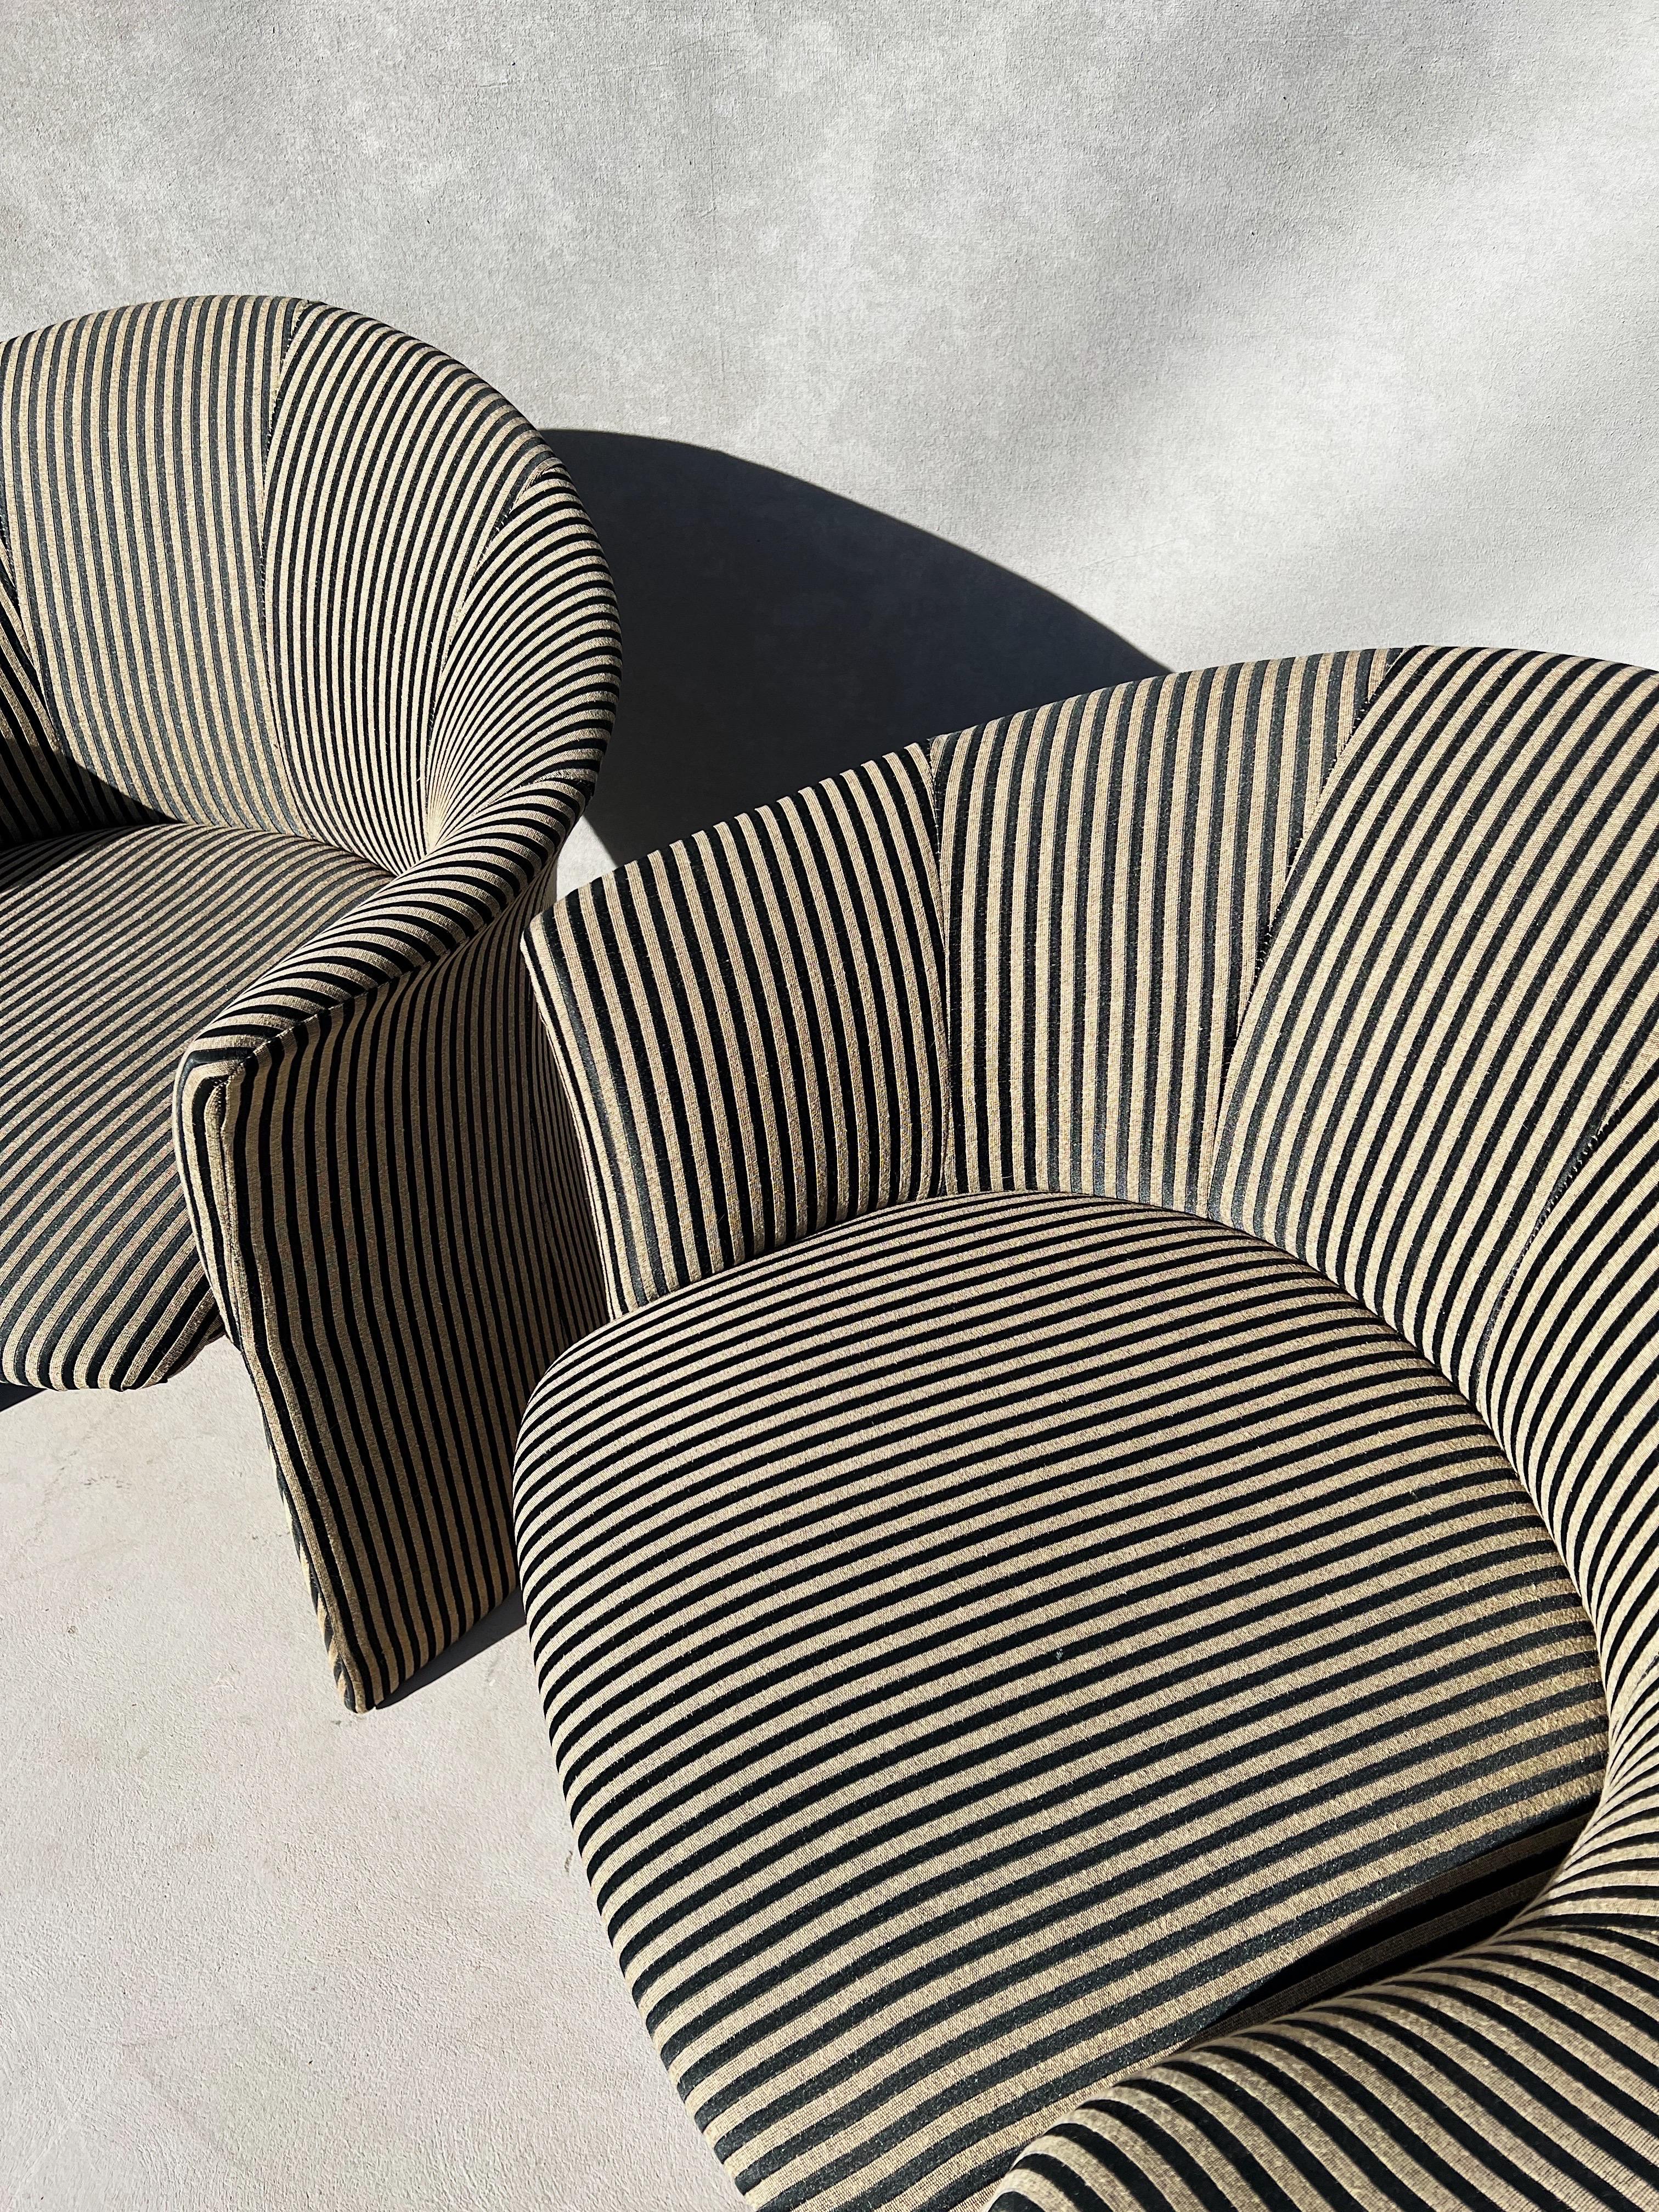 Modern Vintage Pair of Striped Chairs, Attributed to Roche Bobois 